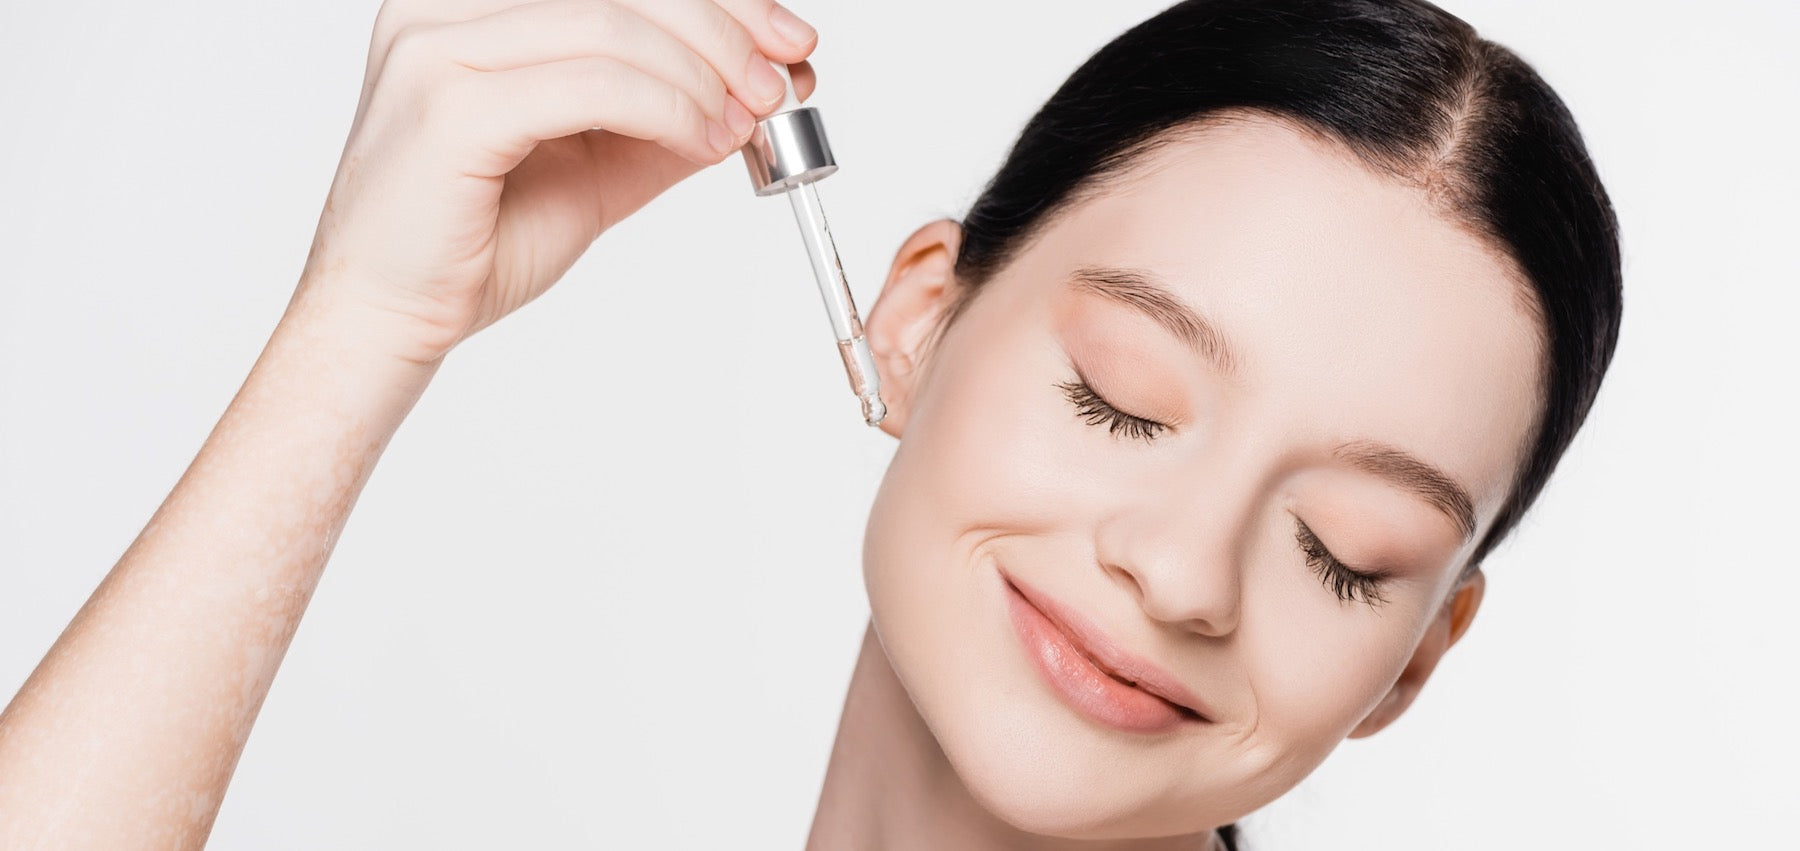 Top Things To Look For When Choosing Your Hyaluronic Acid Serum